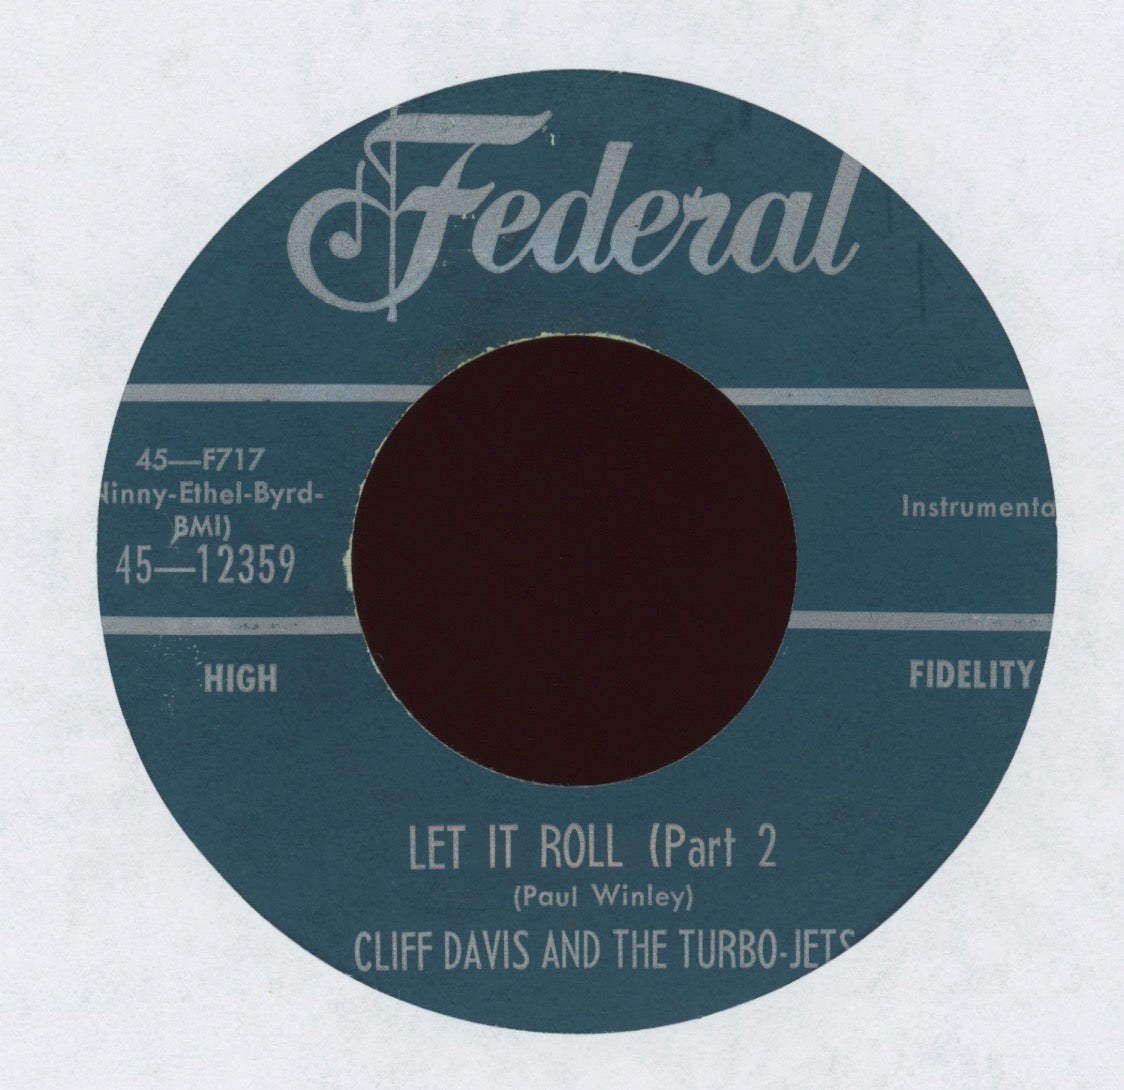 Cliff Davis And The Turbo-Jets - Let It Roll (Part 1) / Let It Roll (Part 2) on Federal